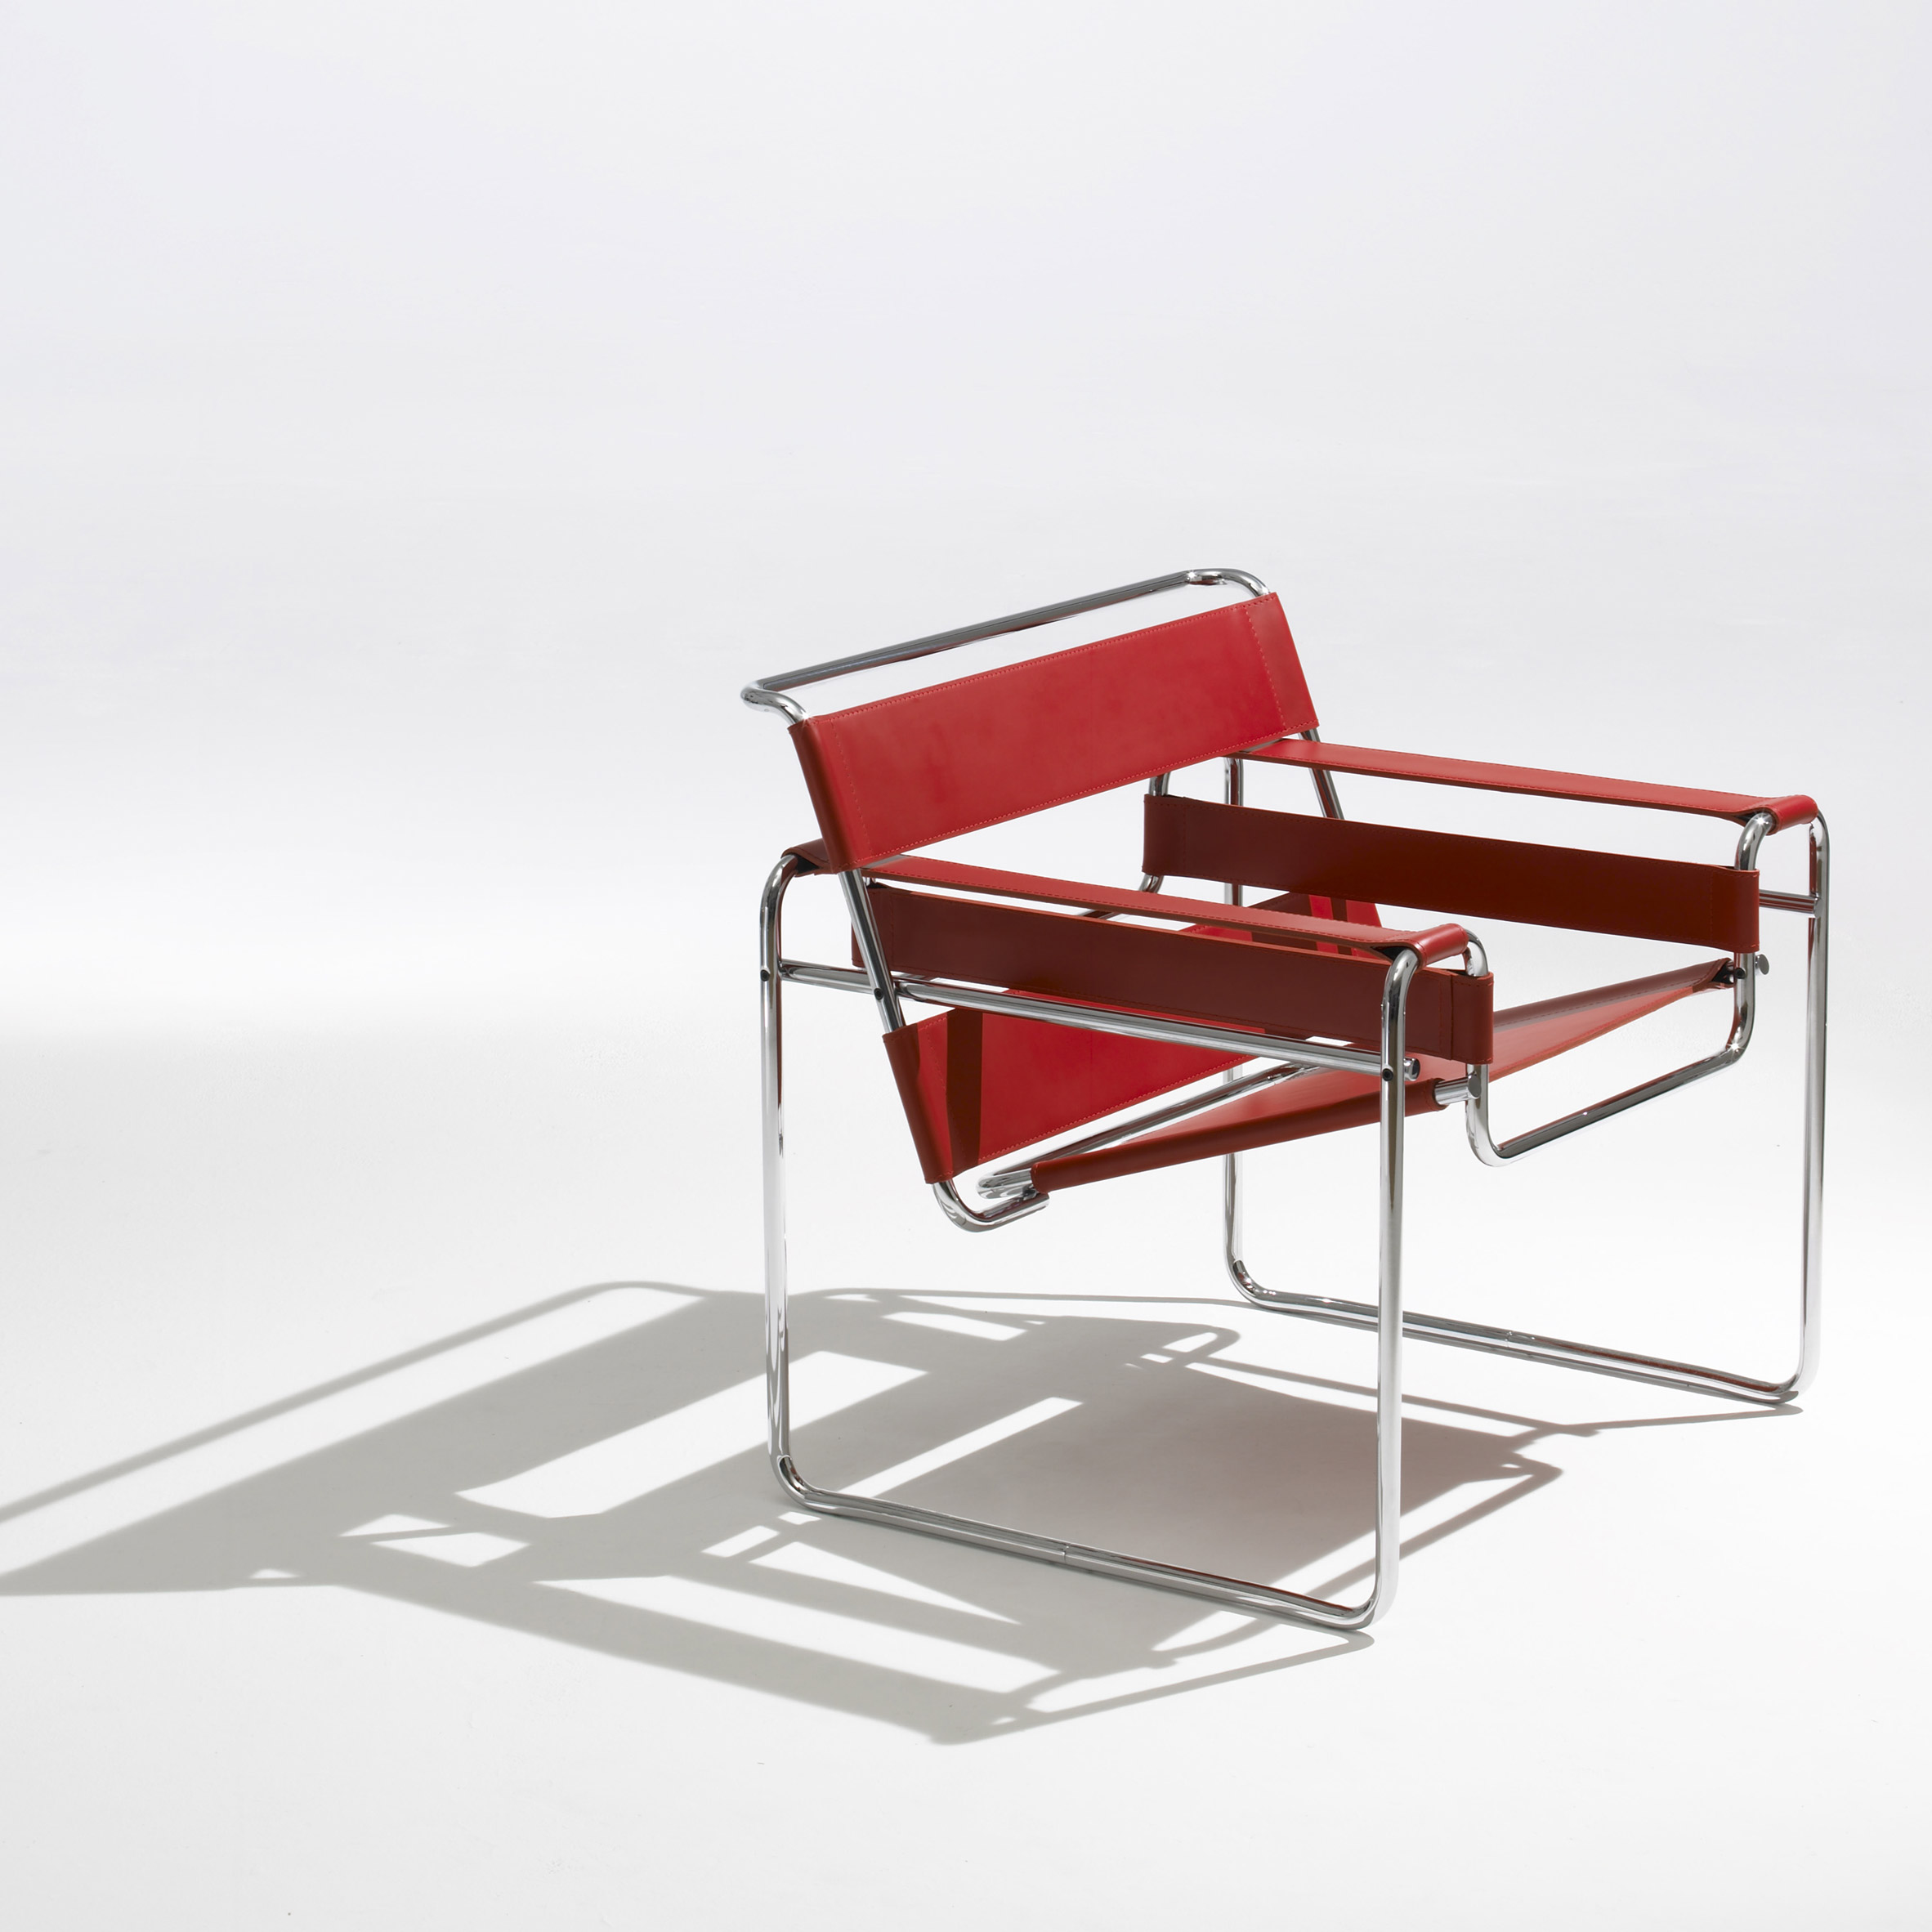 10 Bauhaus furniture designs: chairs, tables, a lamp and chess set